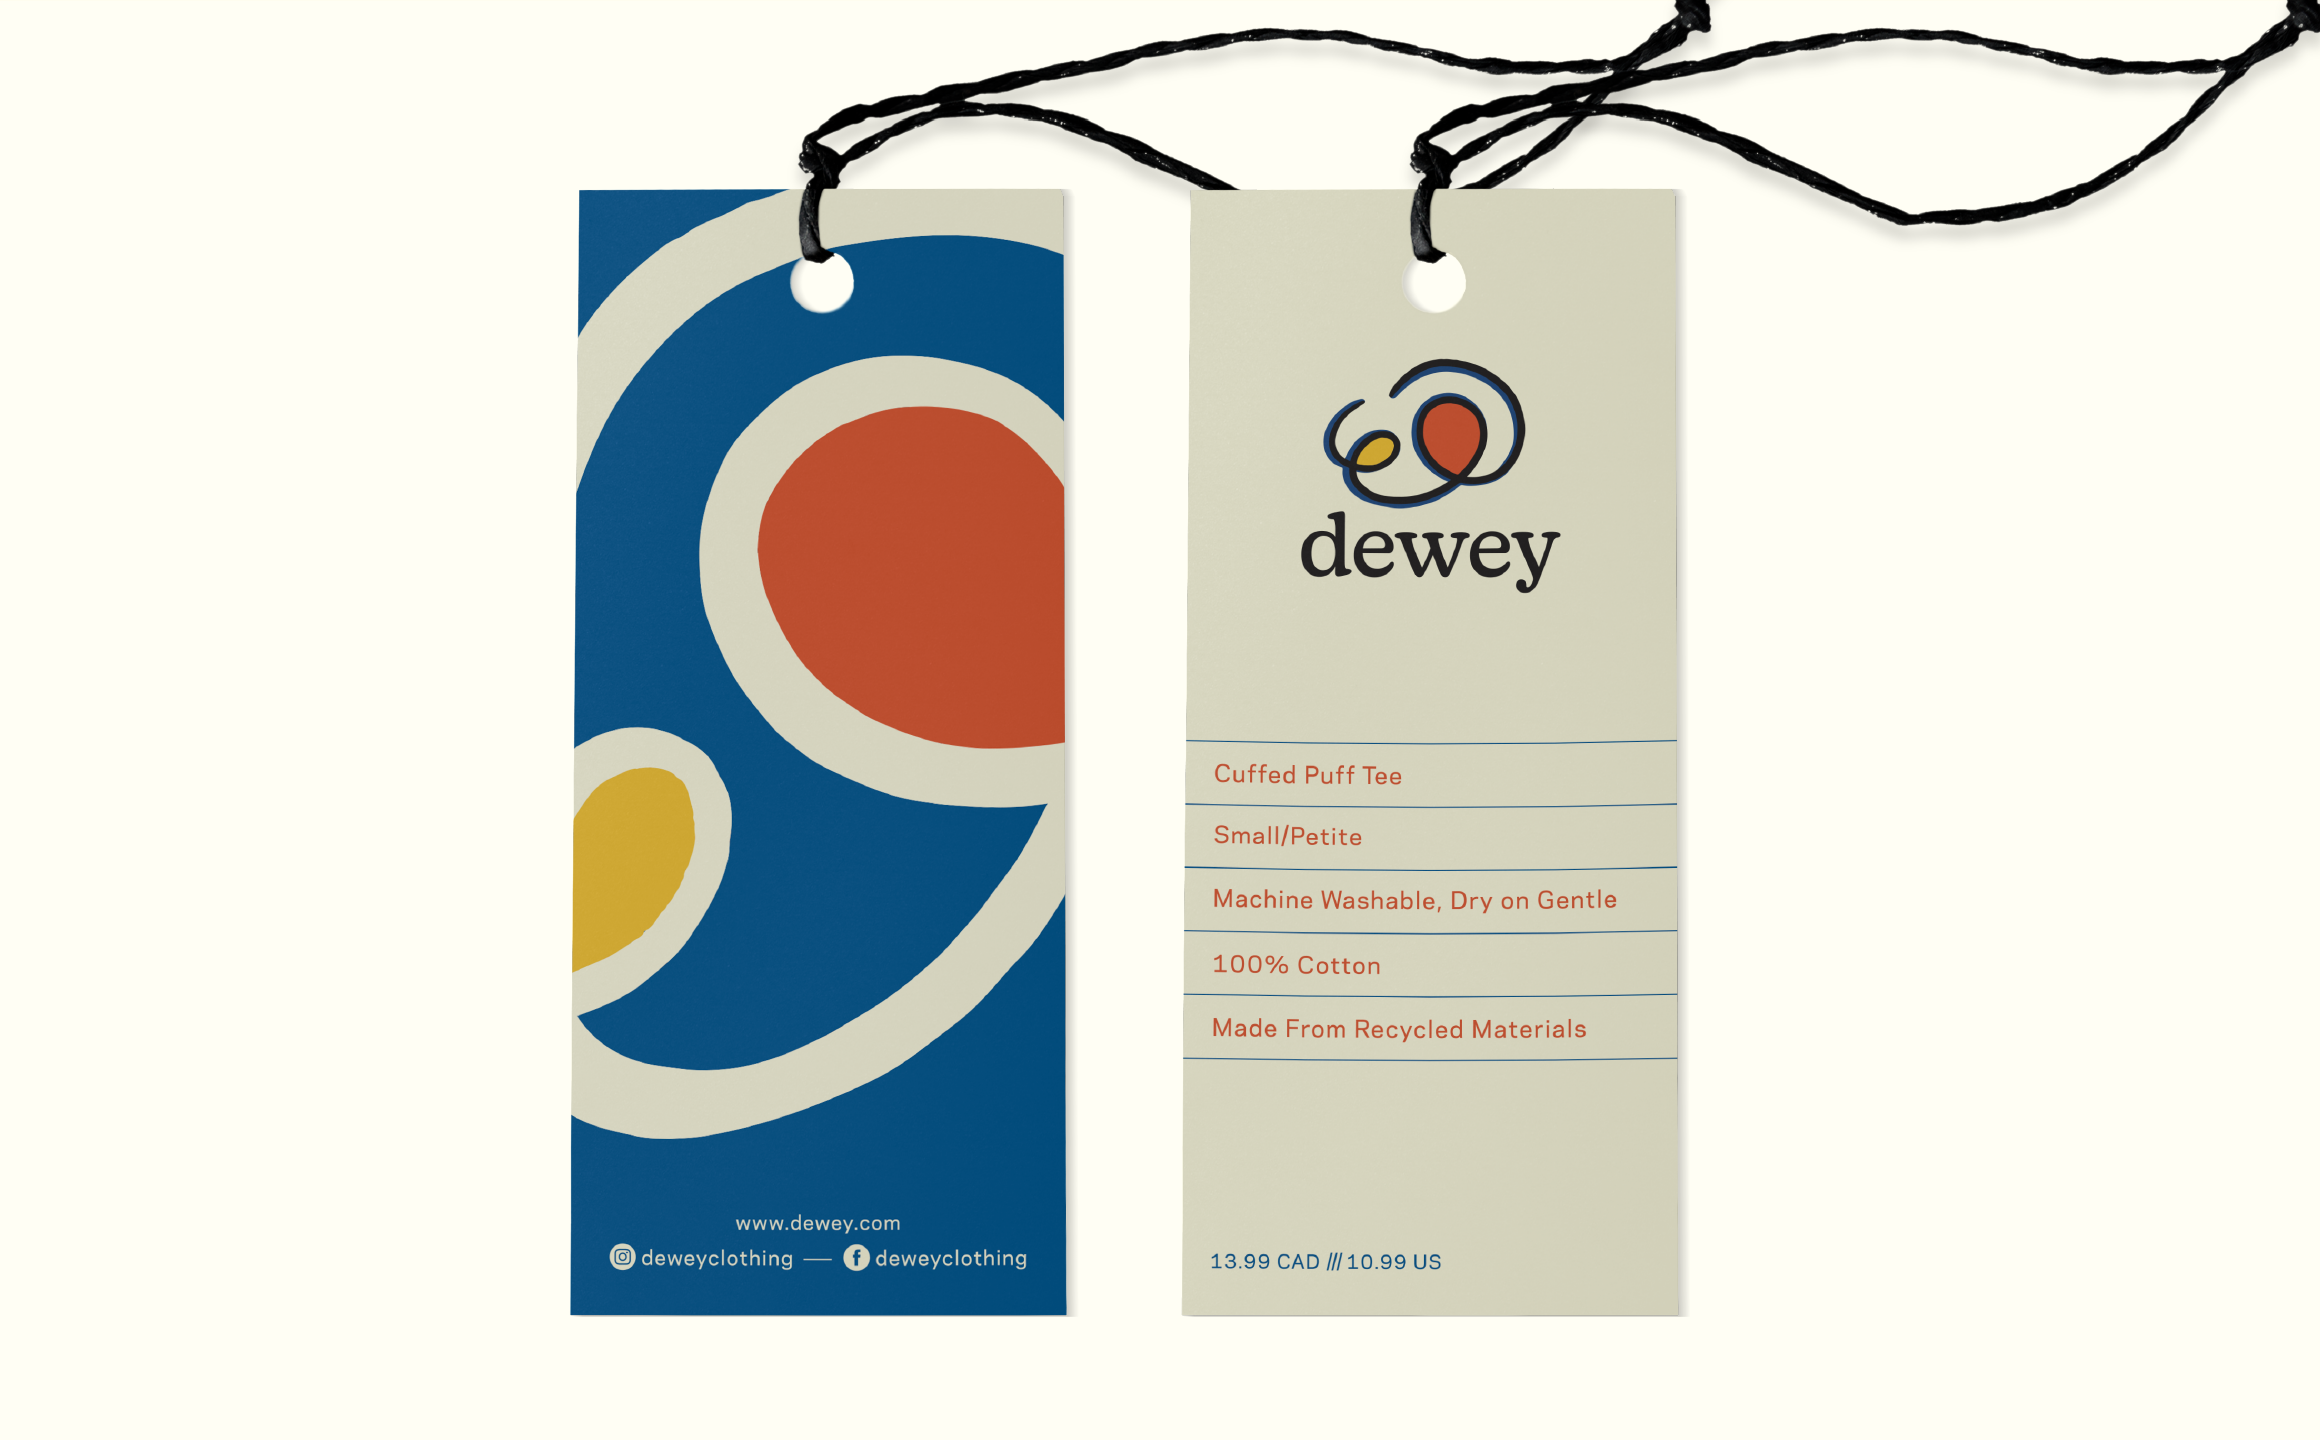 Picture of hanging tags with the Dewey information on it.